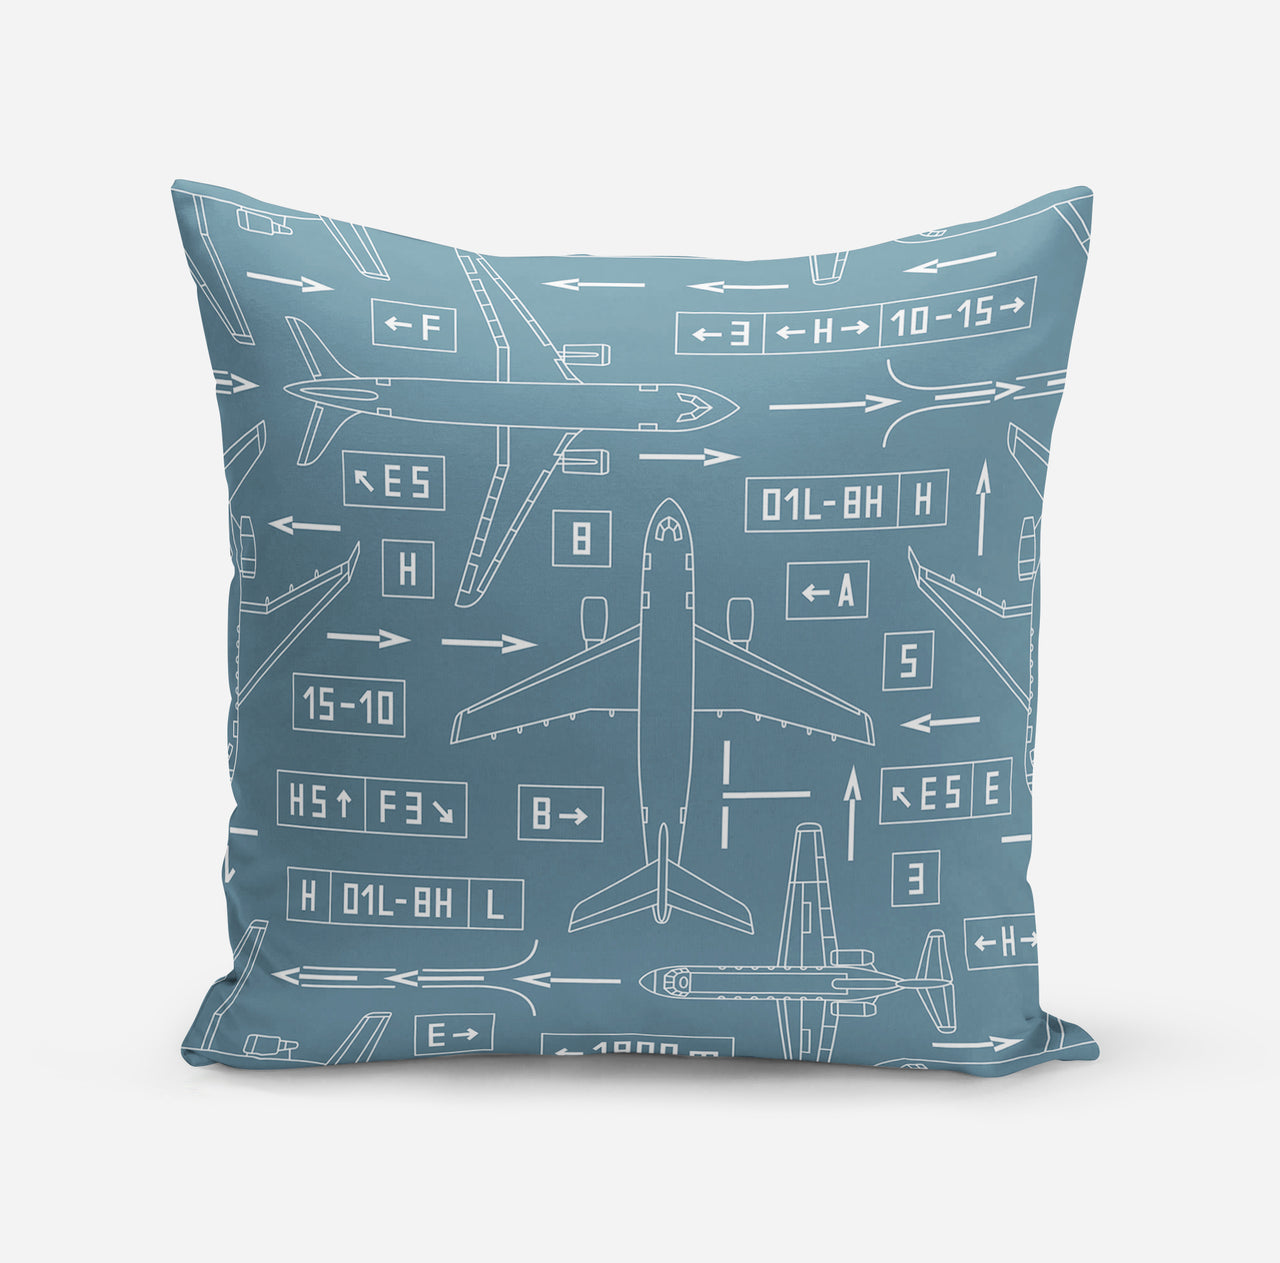 Jet Planes & Airport Signs Designed Pillows